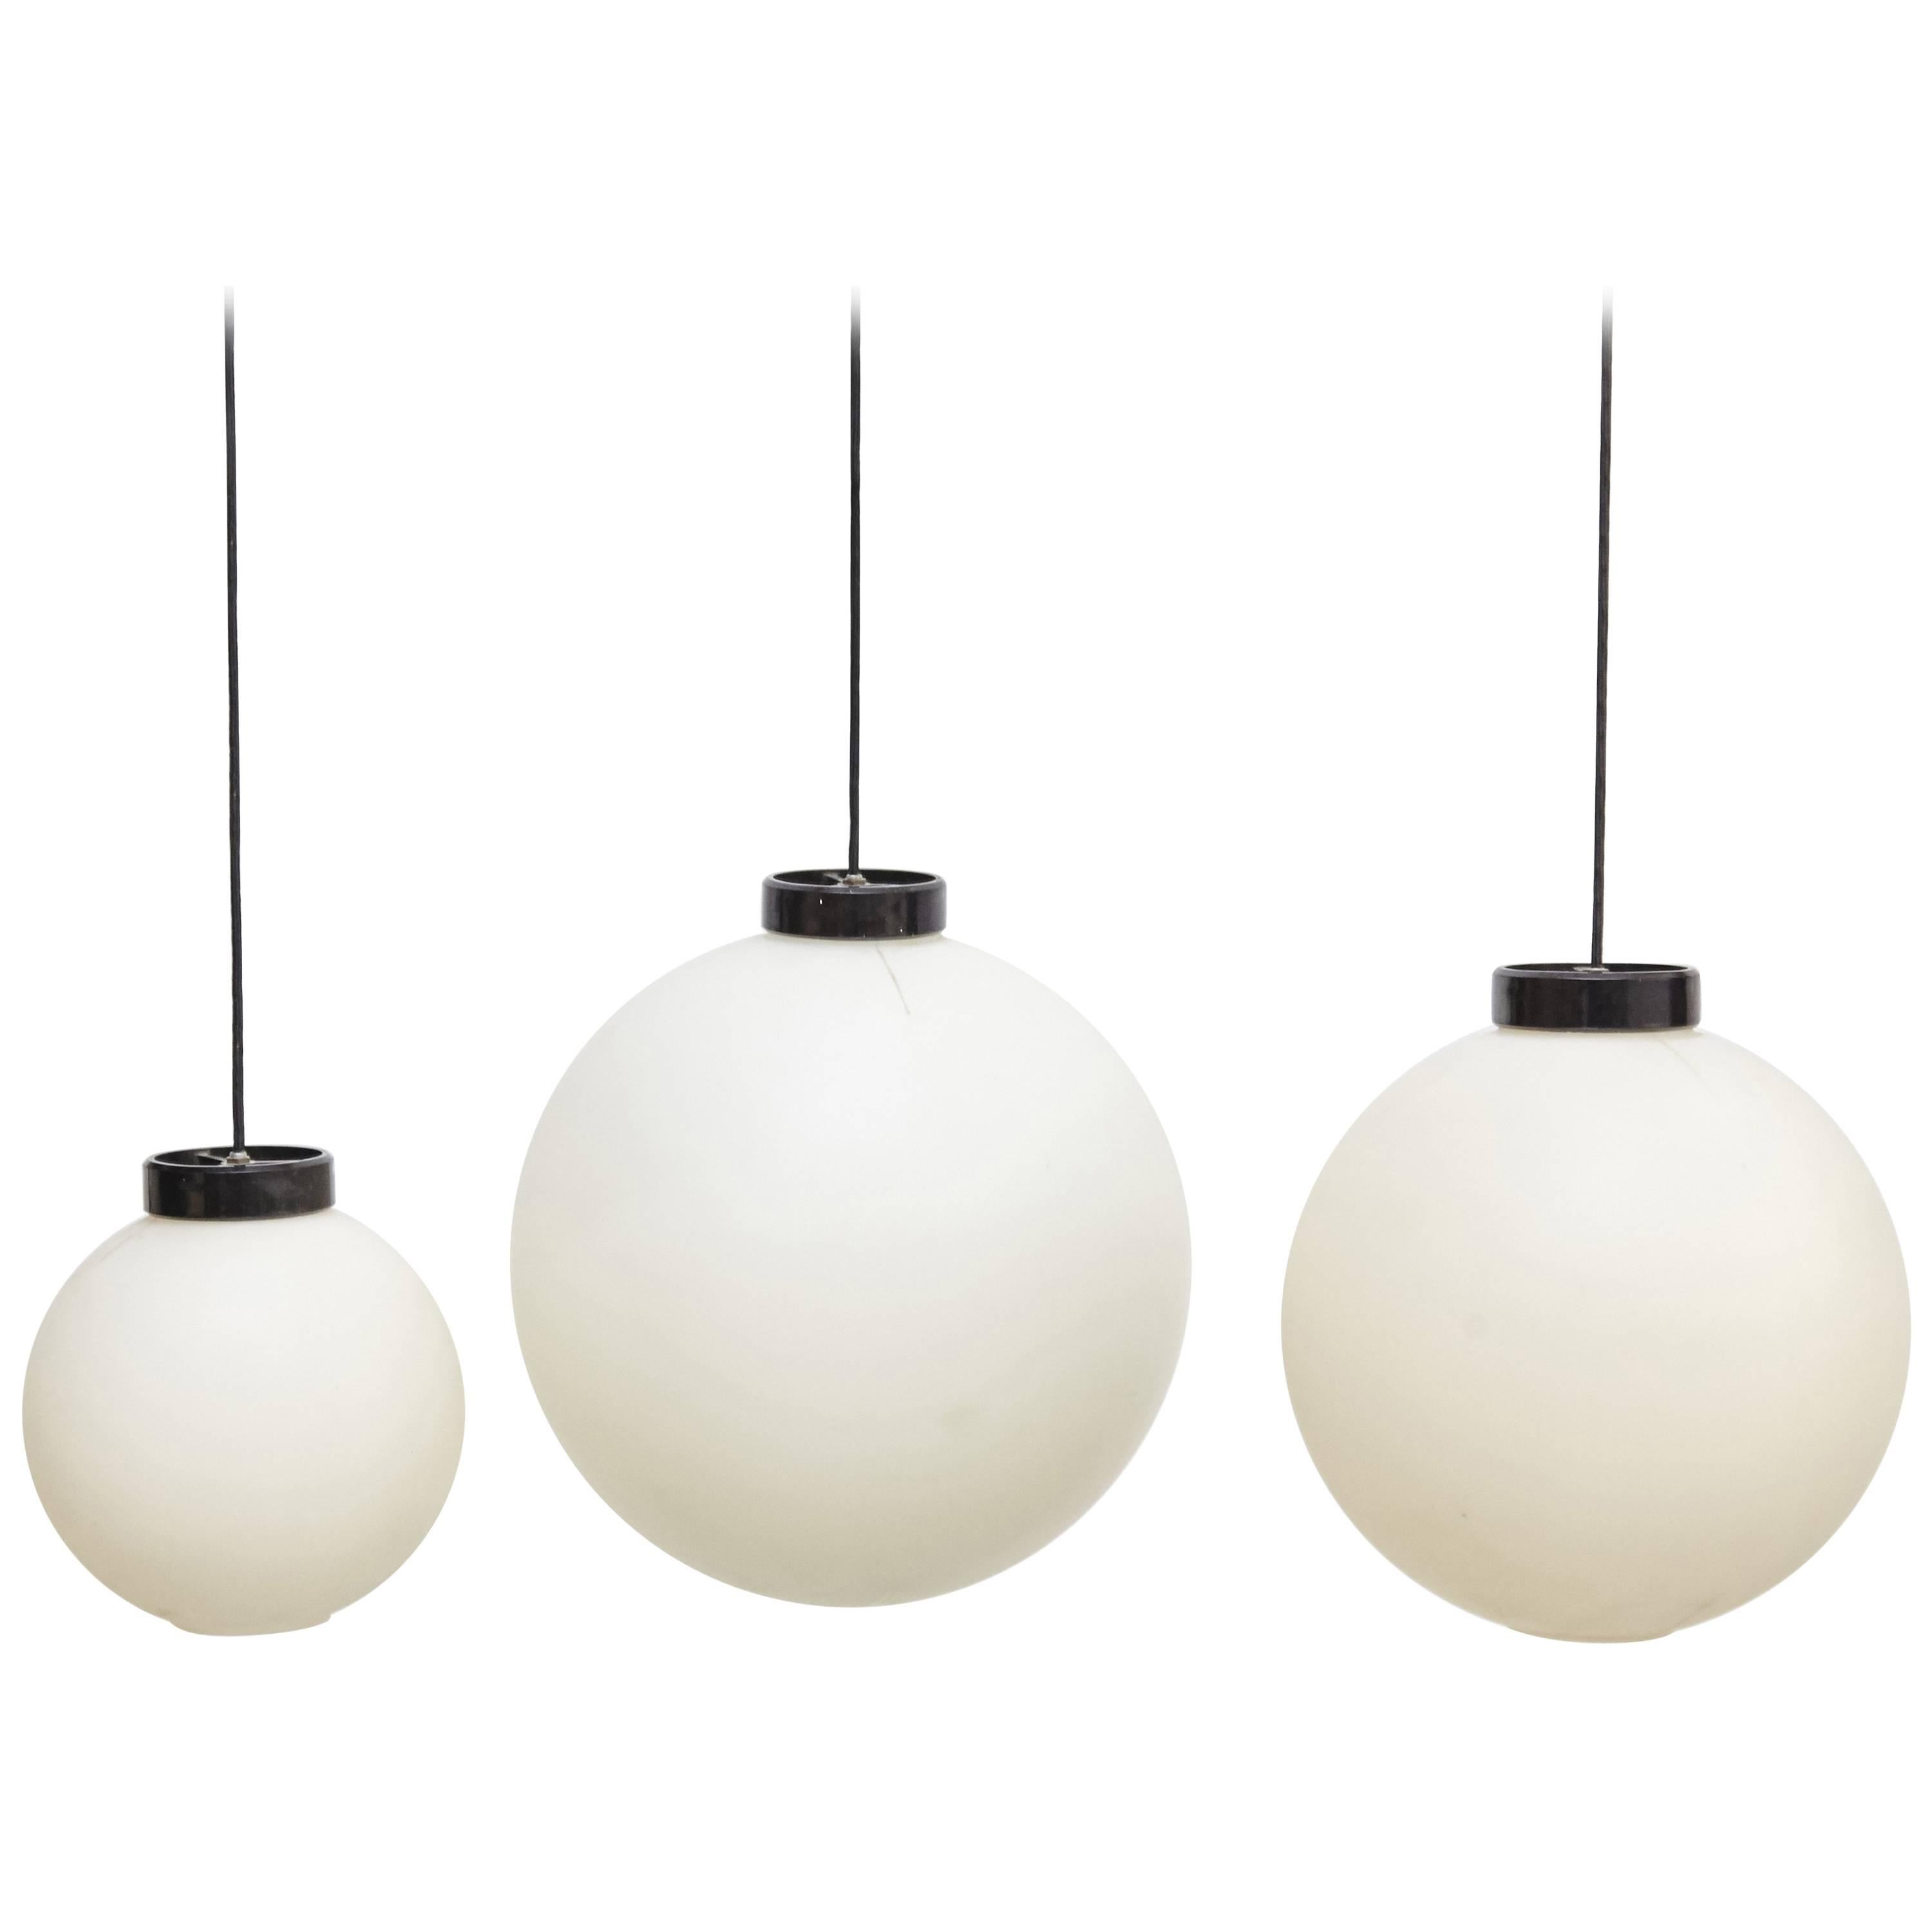 Set of Three Pending Lamps by Miguel Mila for Tramo, circa 1970